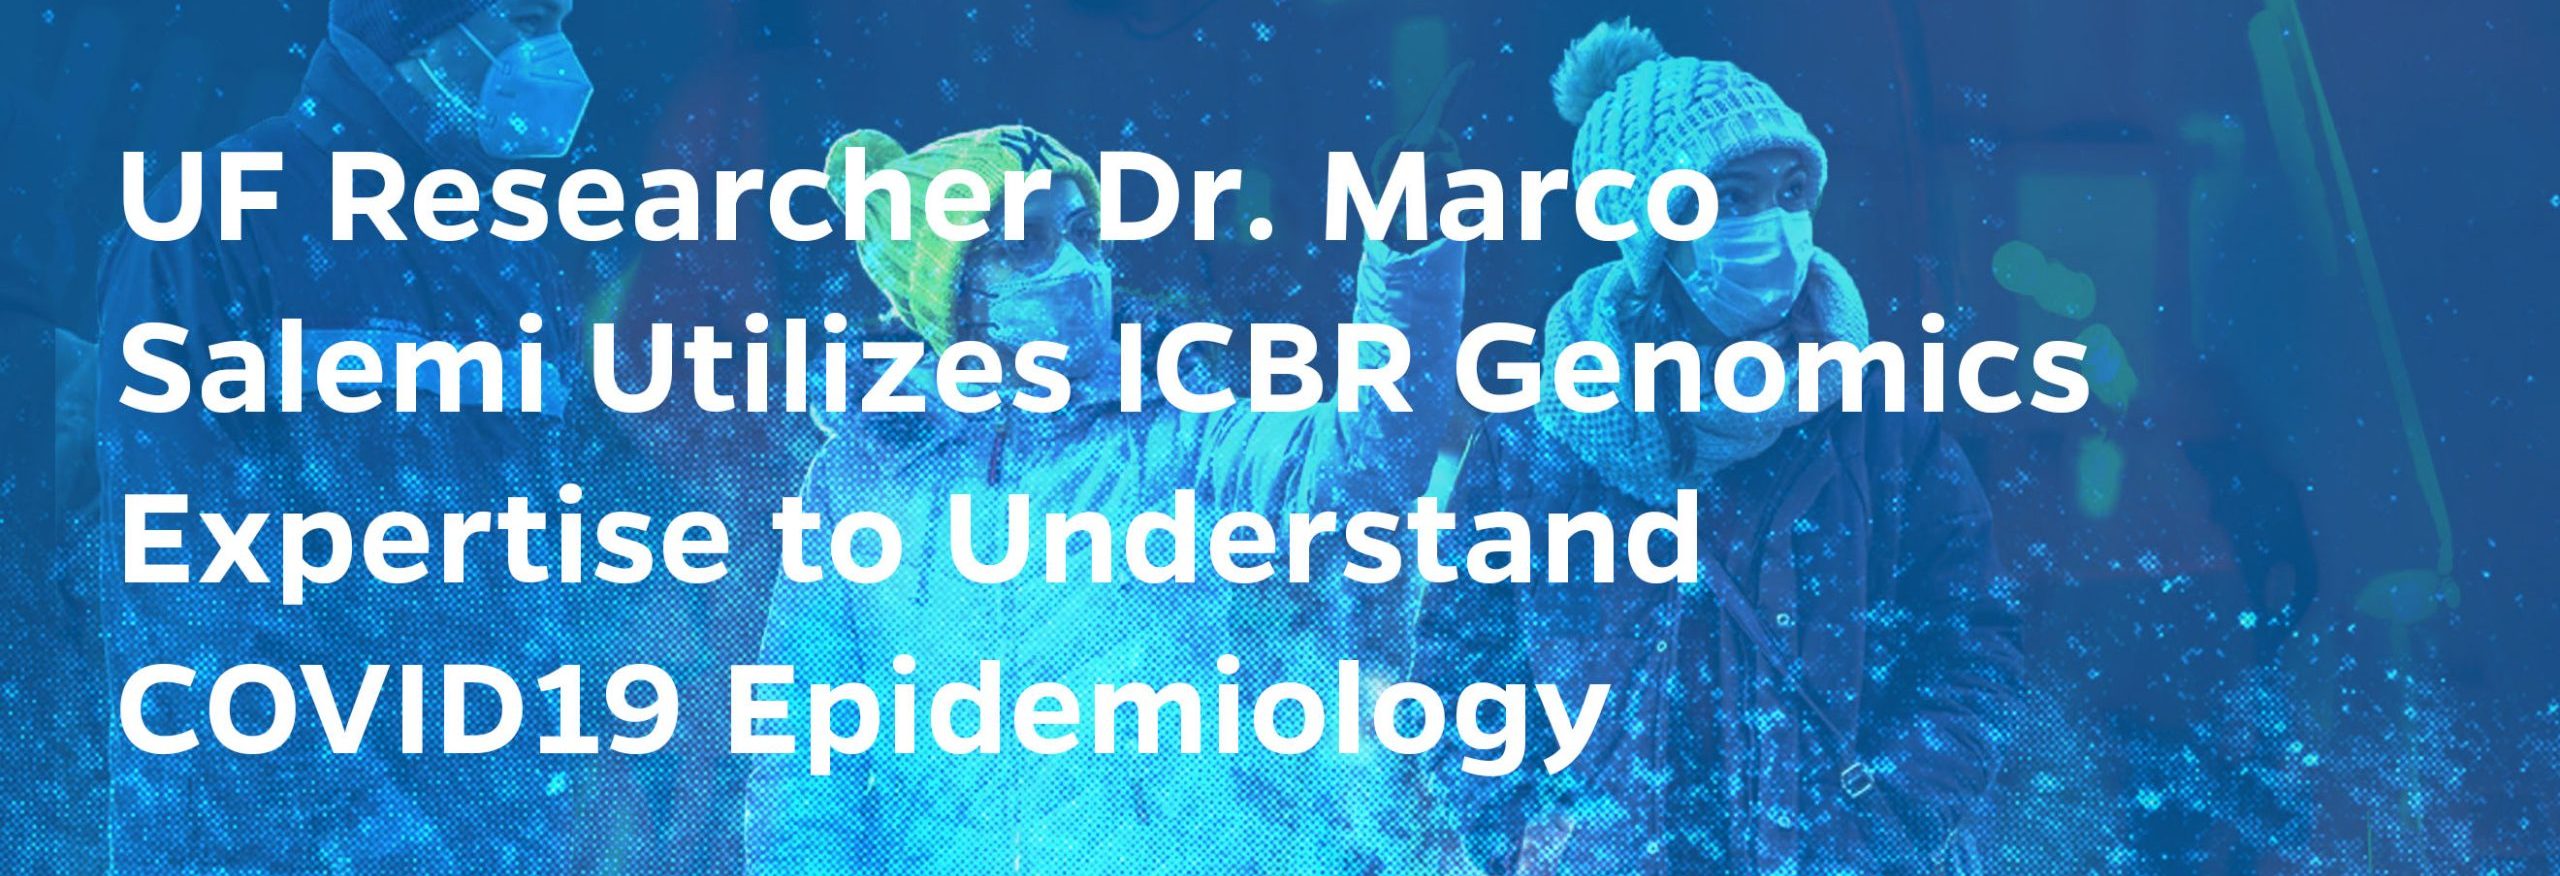 UF Researcher Dr. Marco Salemi utilizes ICBR genomic expertise to ...